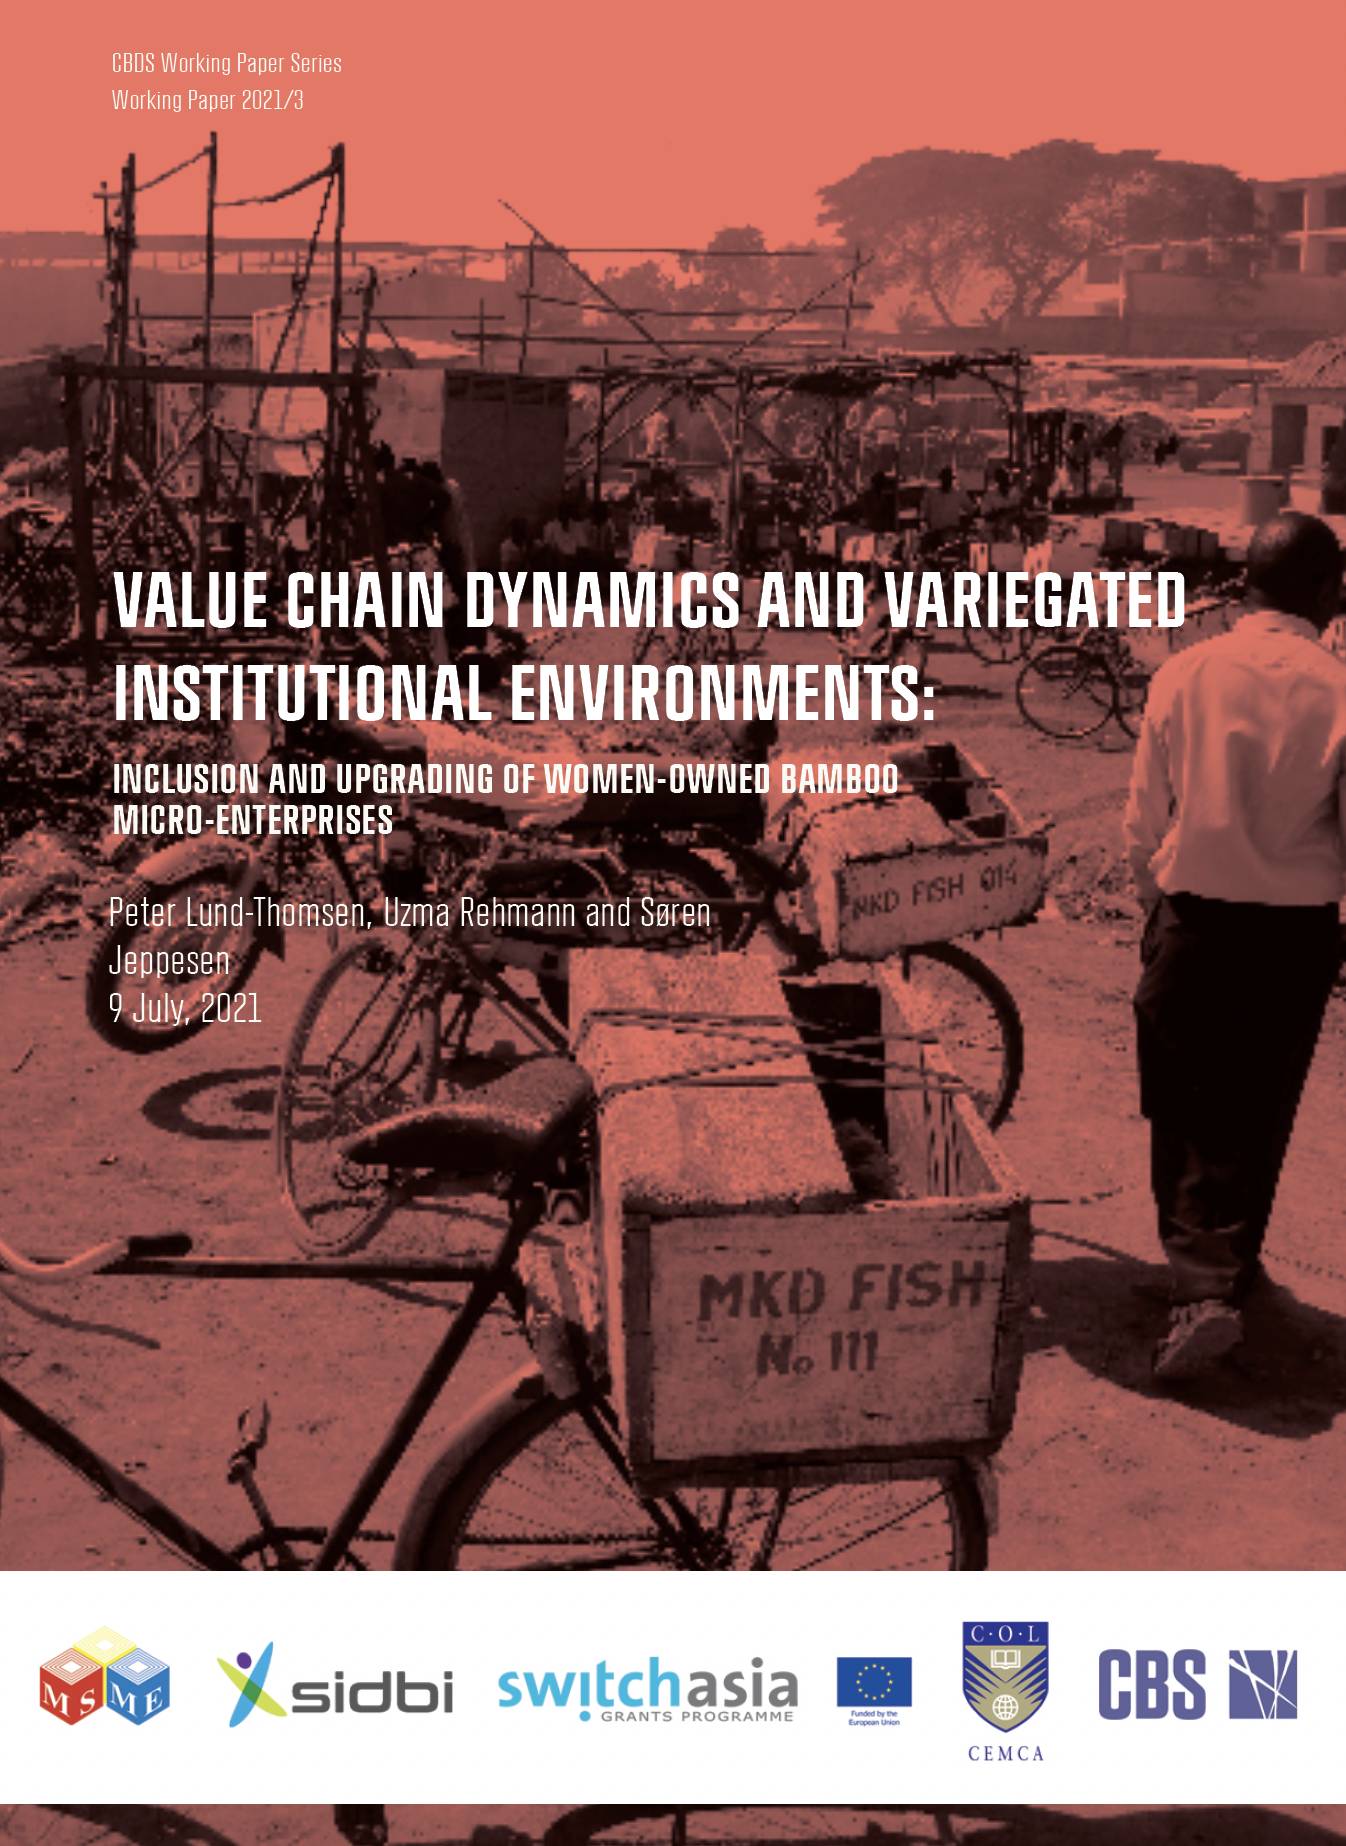 Value chain dynamics and variegated institutional environments: inclusion and upgrading of women-own...